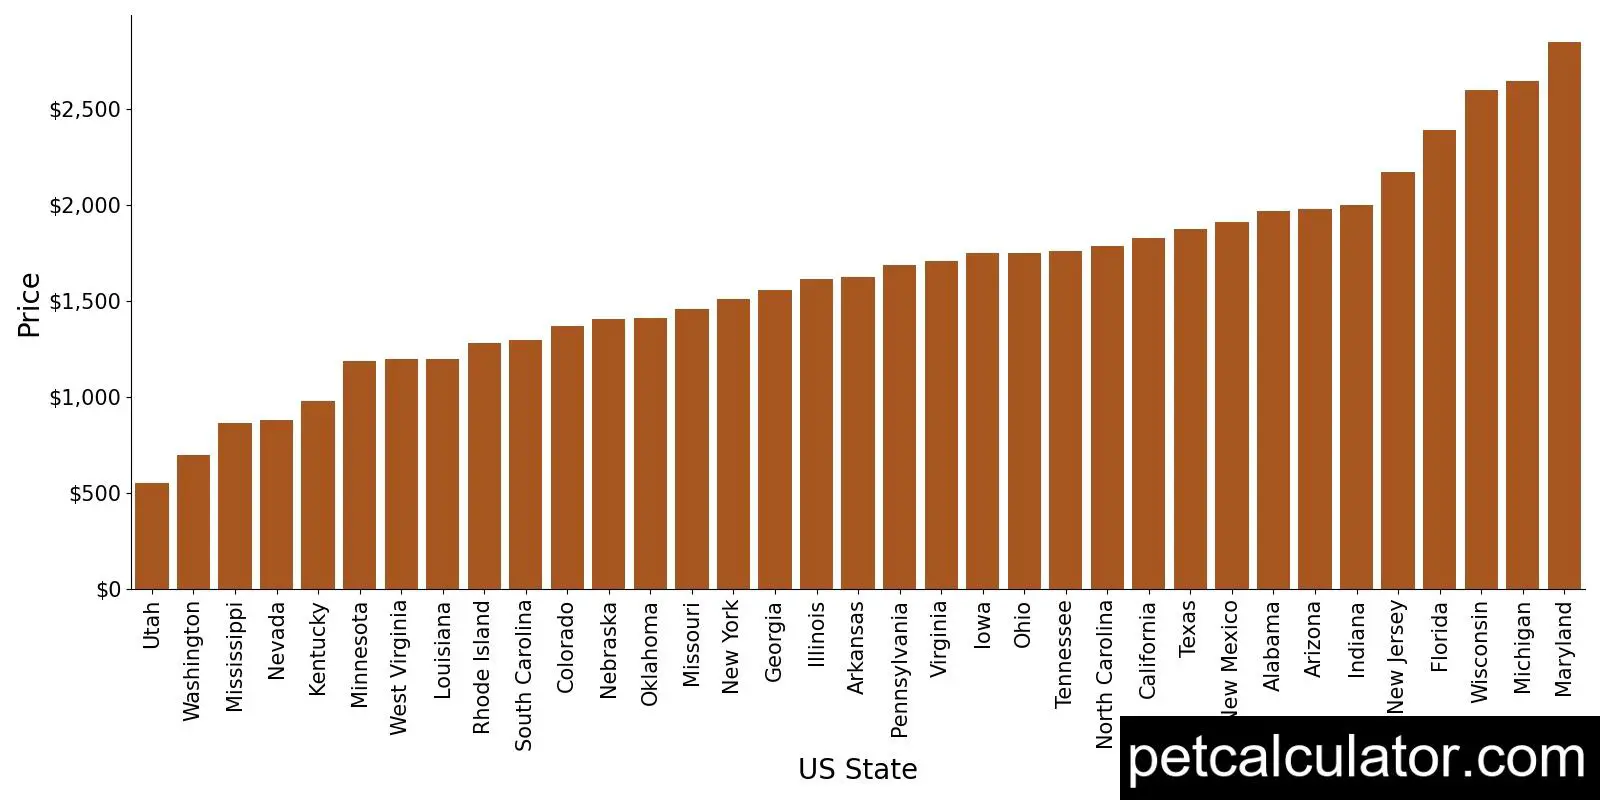 Price of Dachshund by US State 